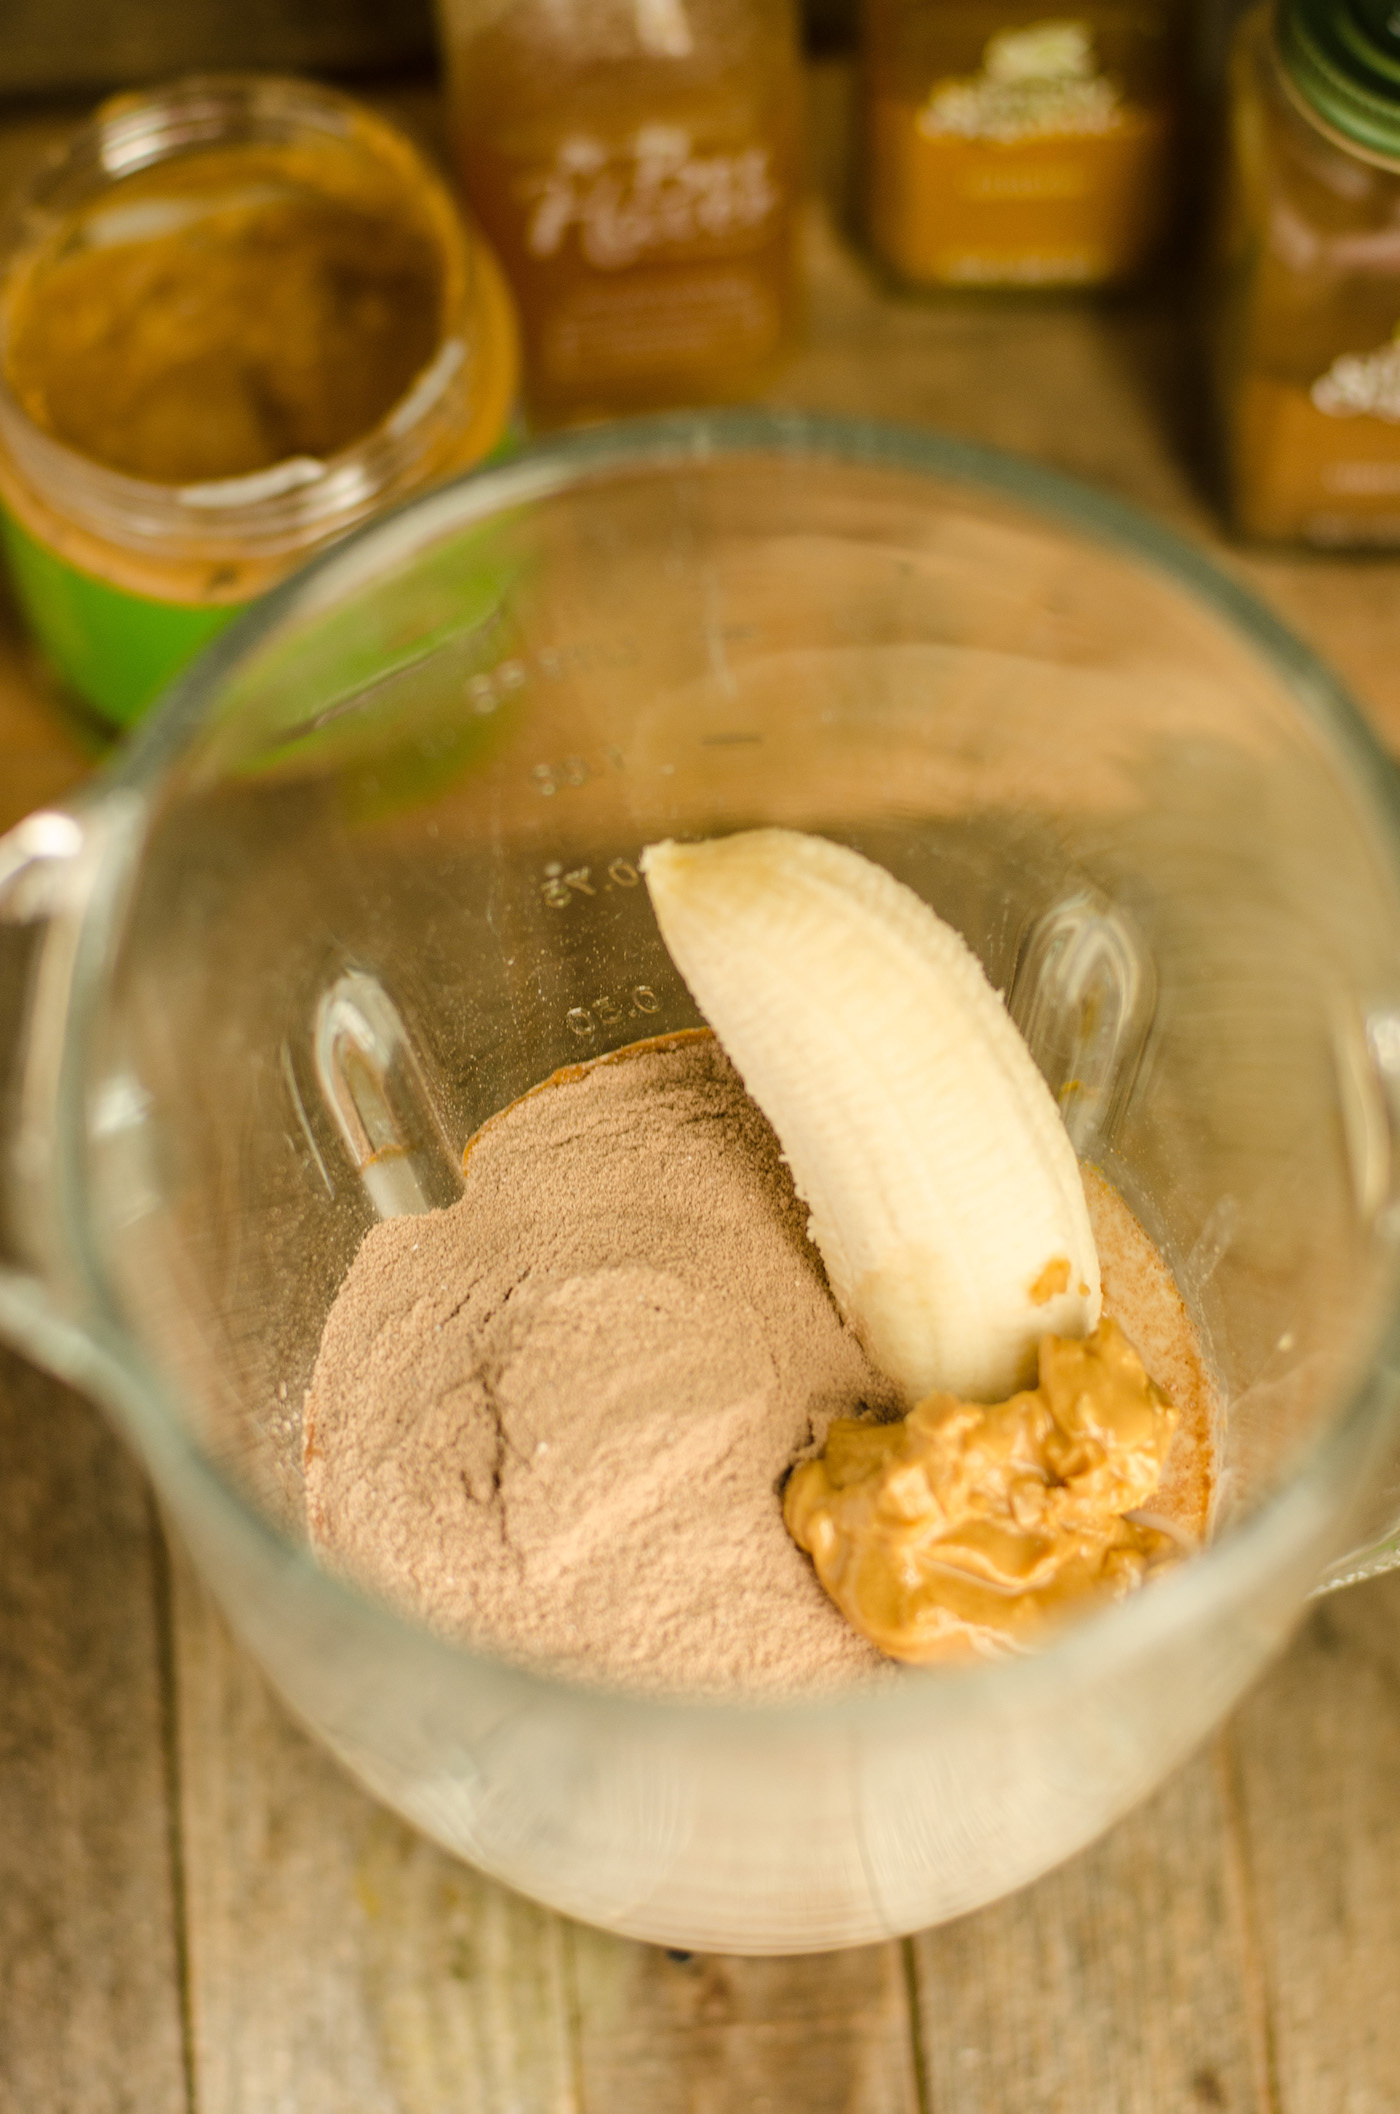 Banana, protein powder, and peanut butter in a blender